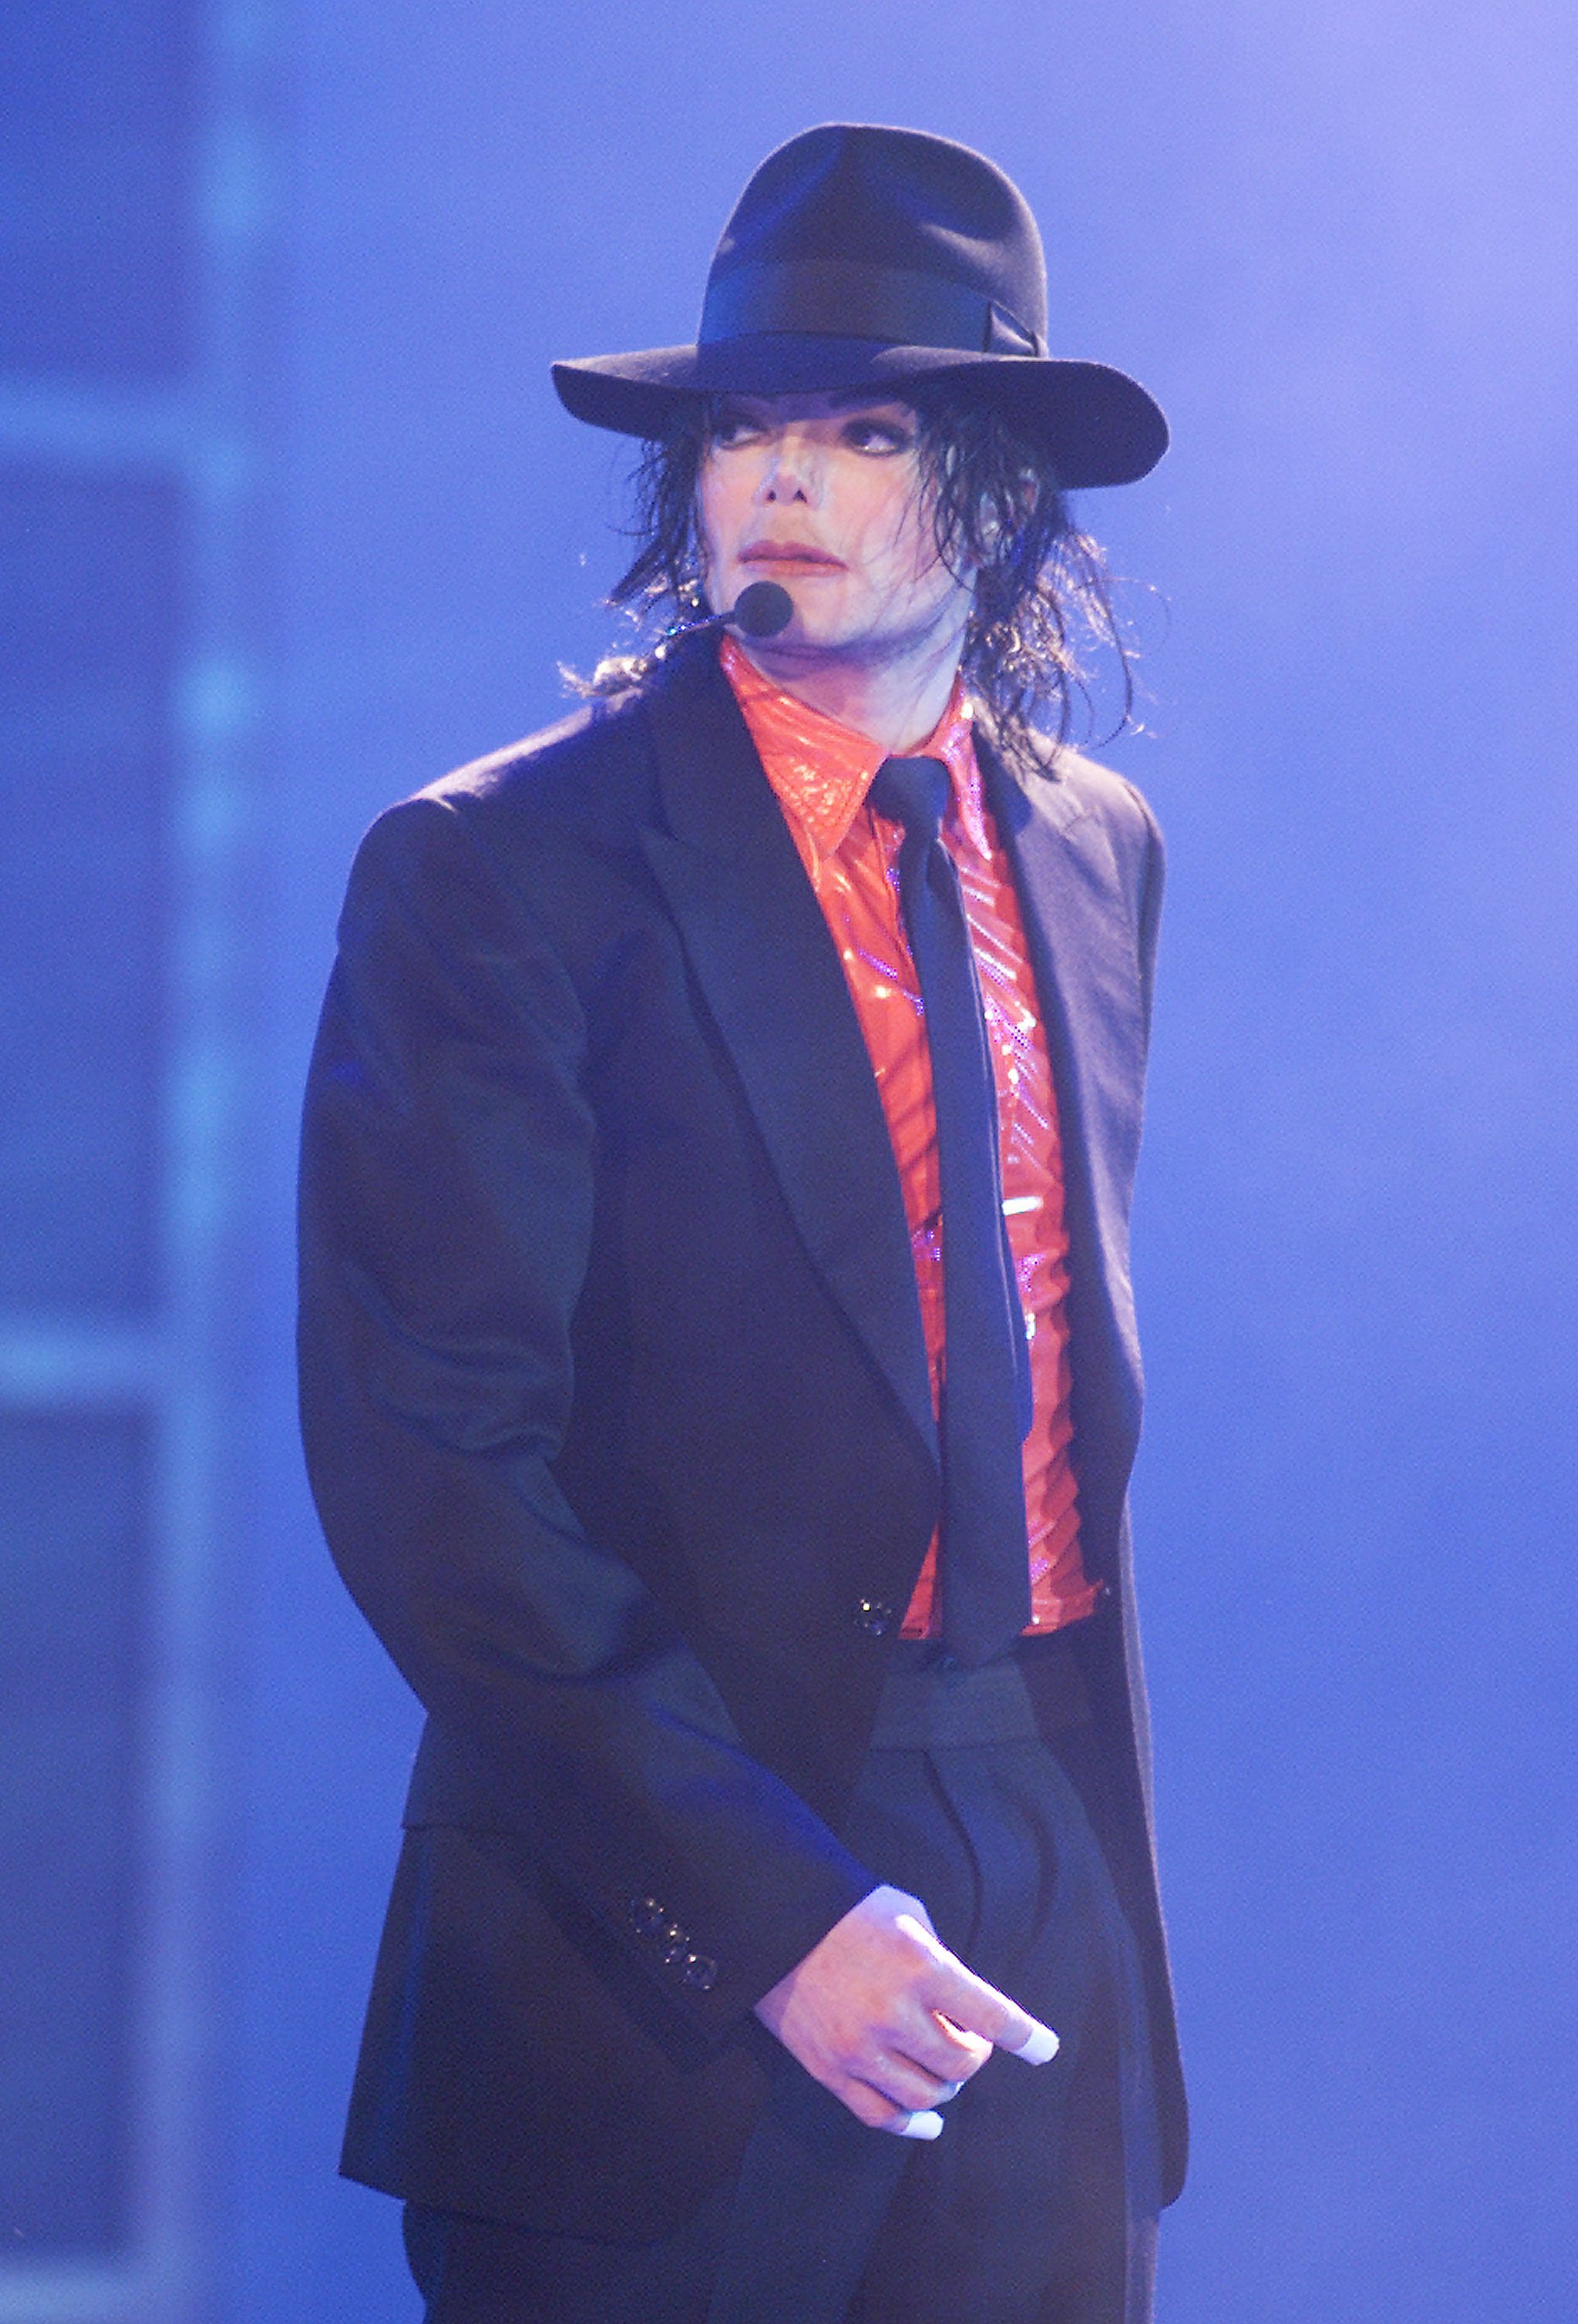 Michael Jackson performs at the taping of "American Bandstand's 50th...A Celebration" at the Pasadena Civic Auditorium, April 20, 2002. | Photo: GettyImages